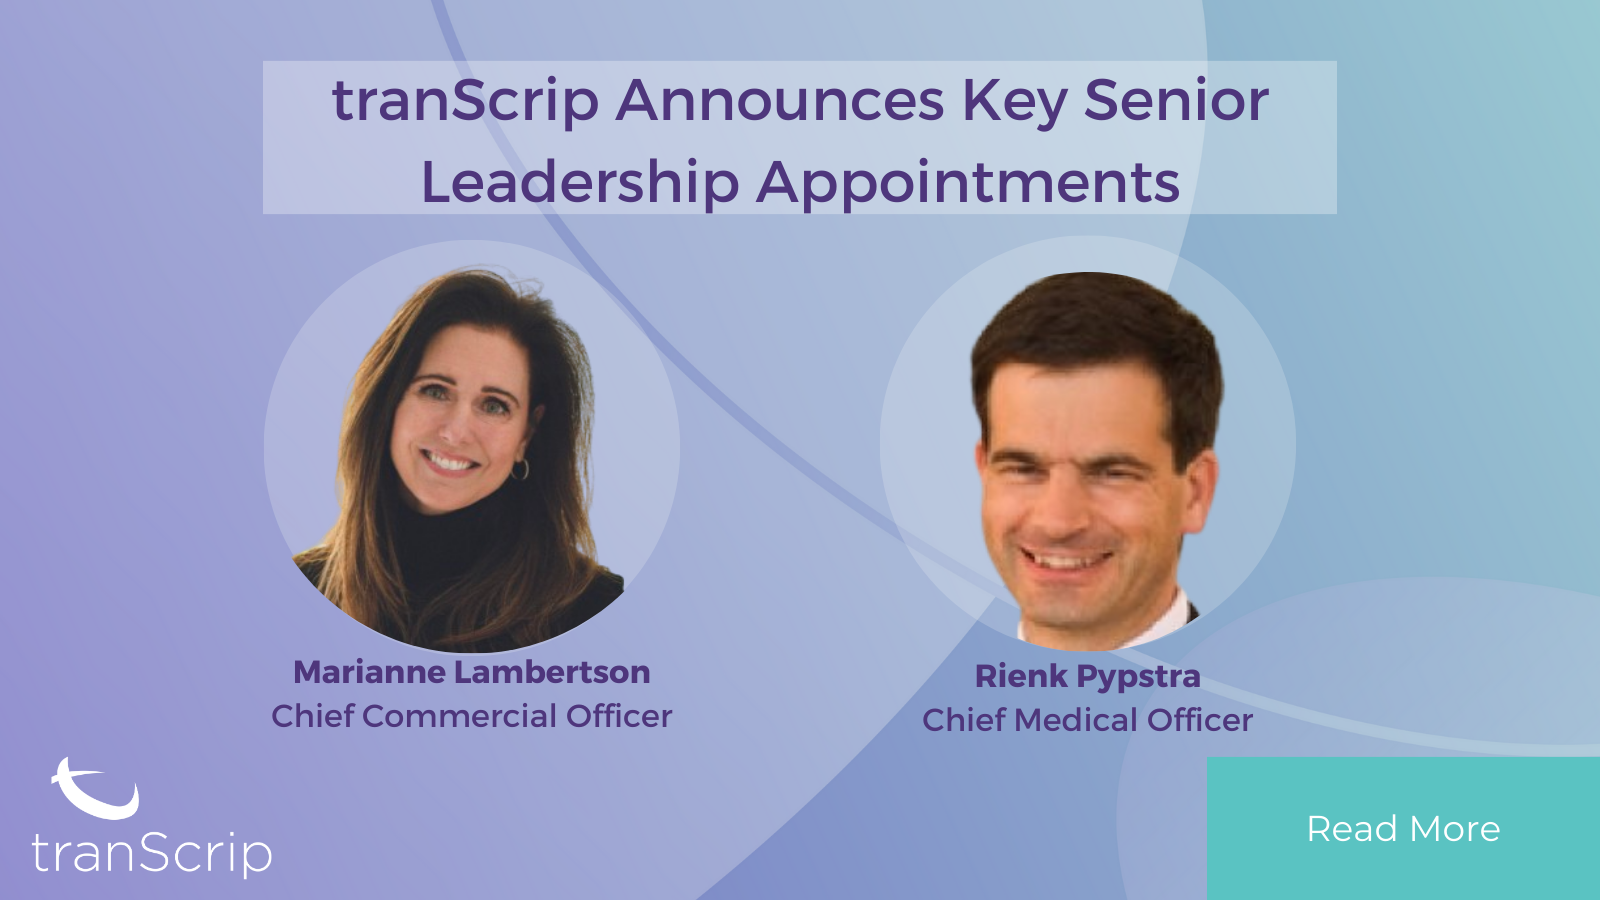 tranScrip Announces Key Senior Leadership Appointments Featured Image